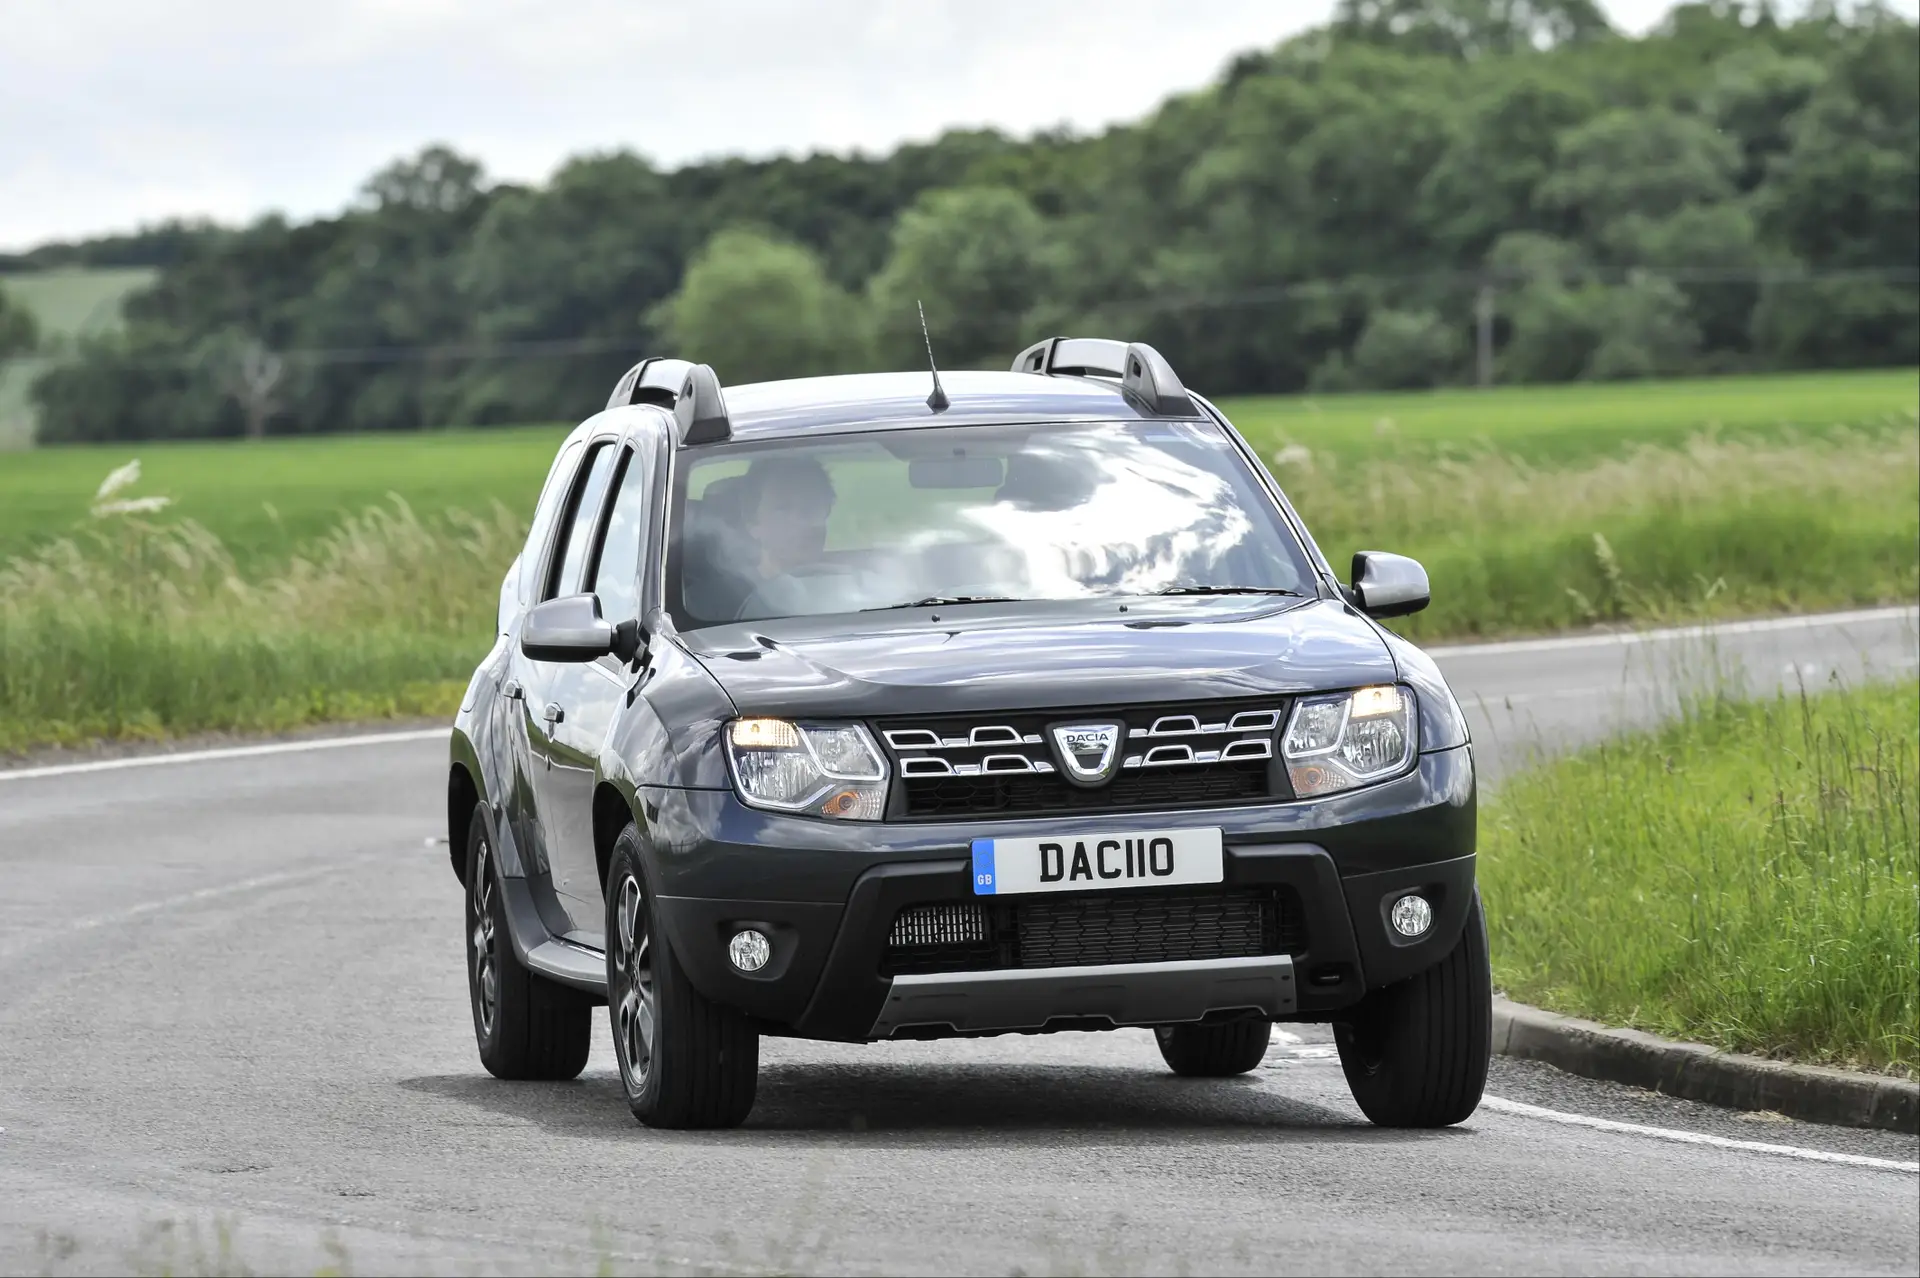 Dacia Duster 1.6 SCe 2WD review, Car review